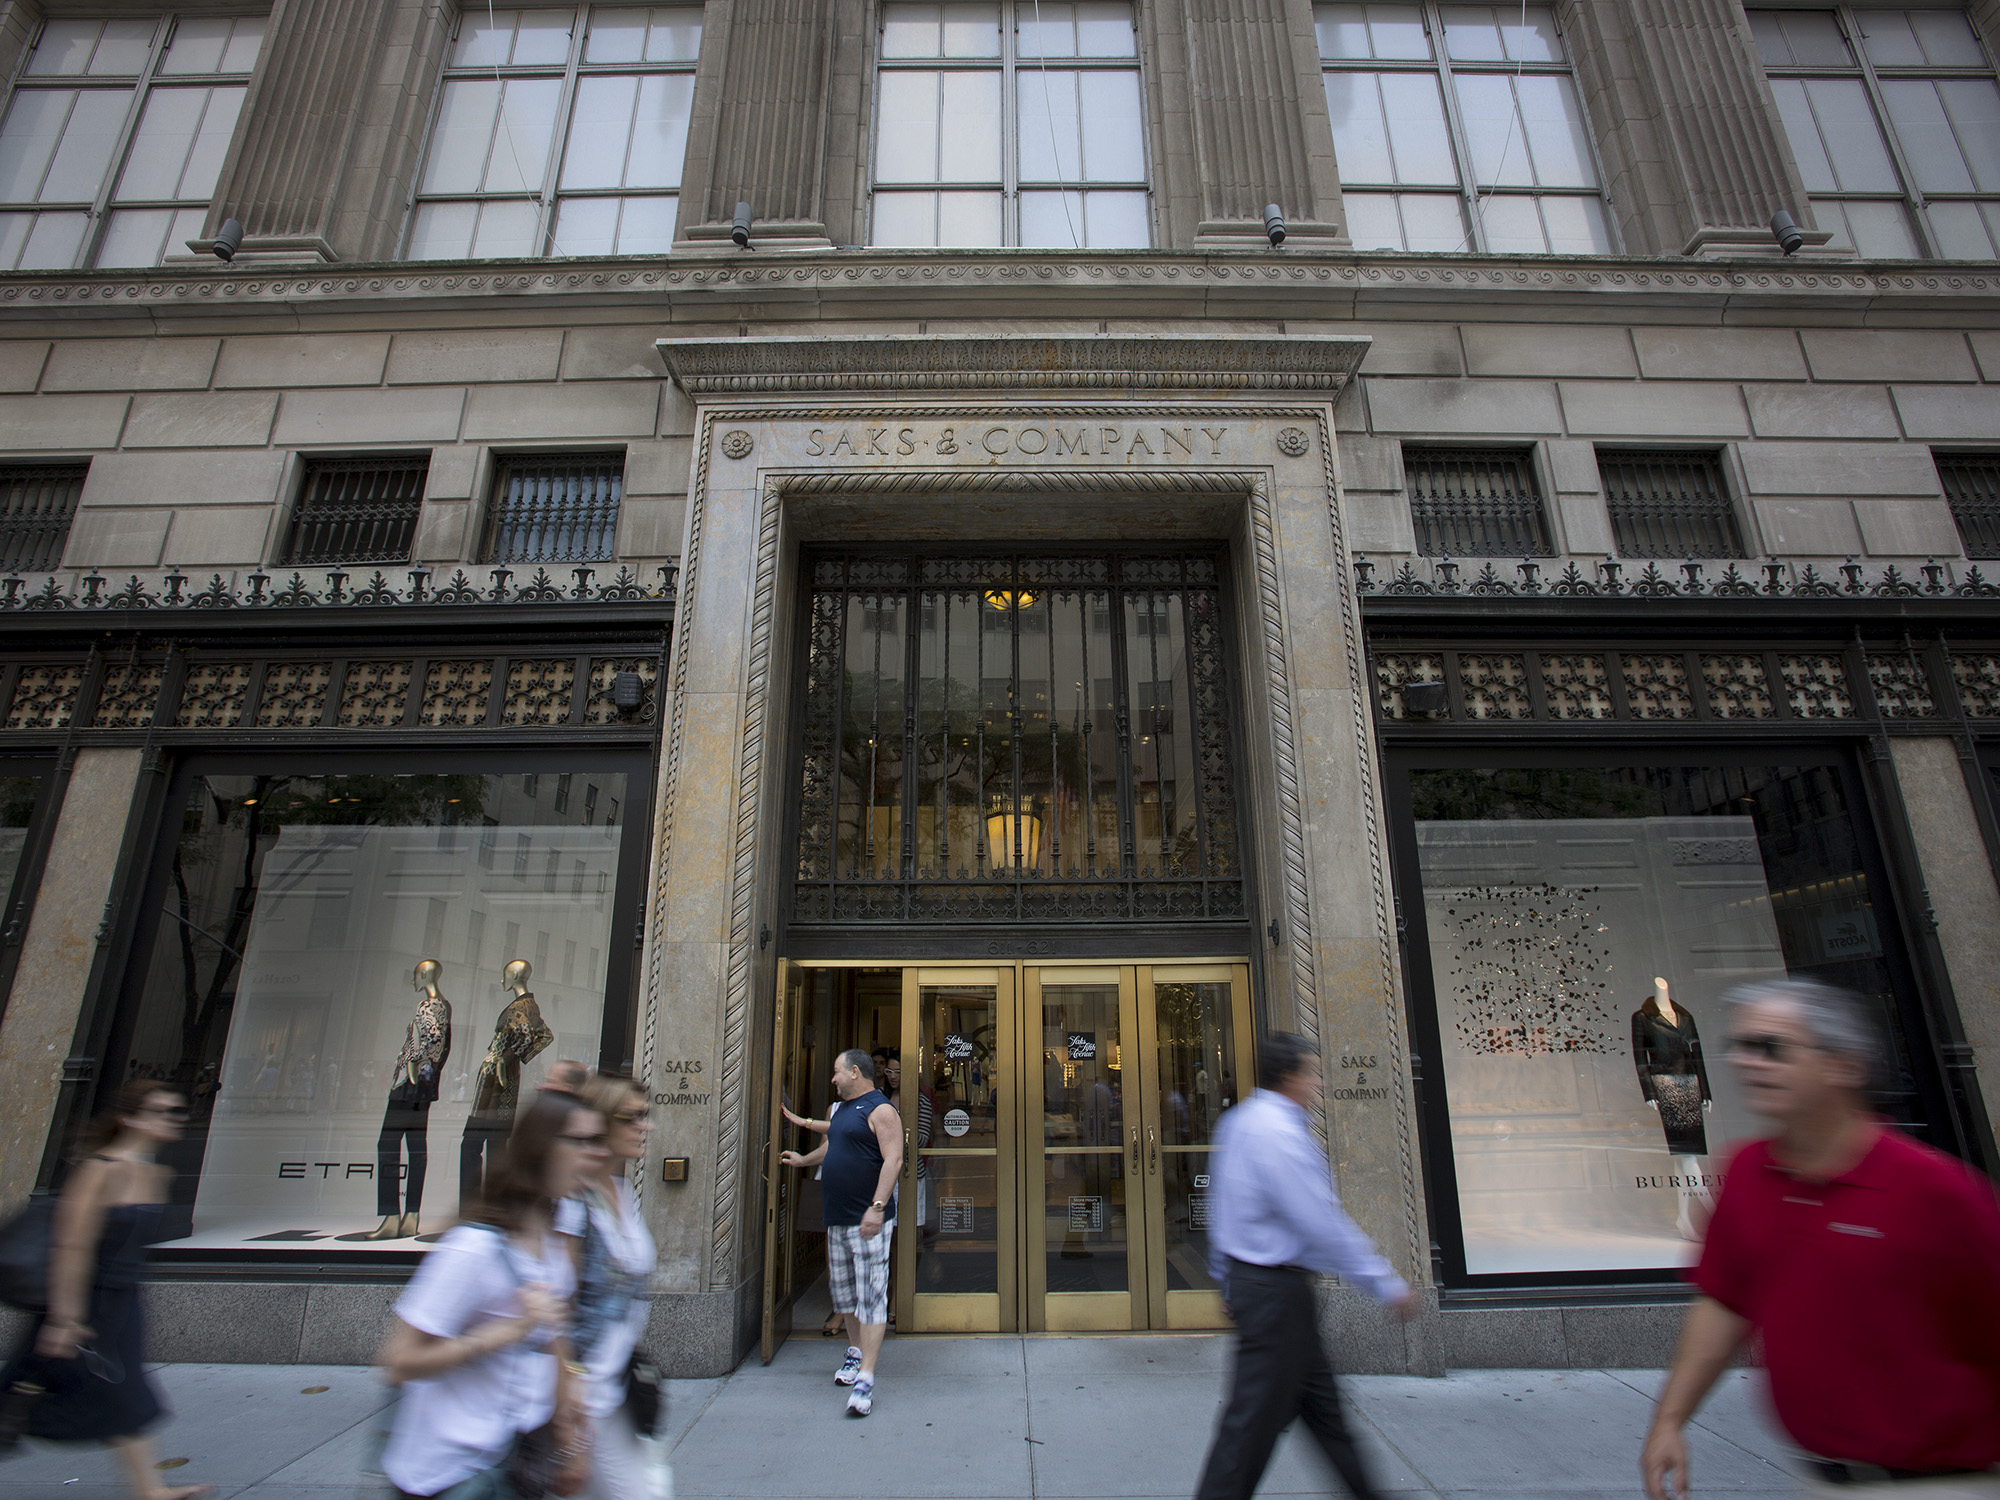 Saks Fifth Avenue Pushes Back Against Cartier on Store Redesign - Bloomberg